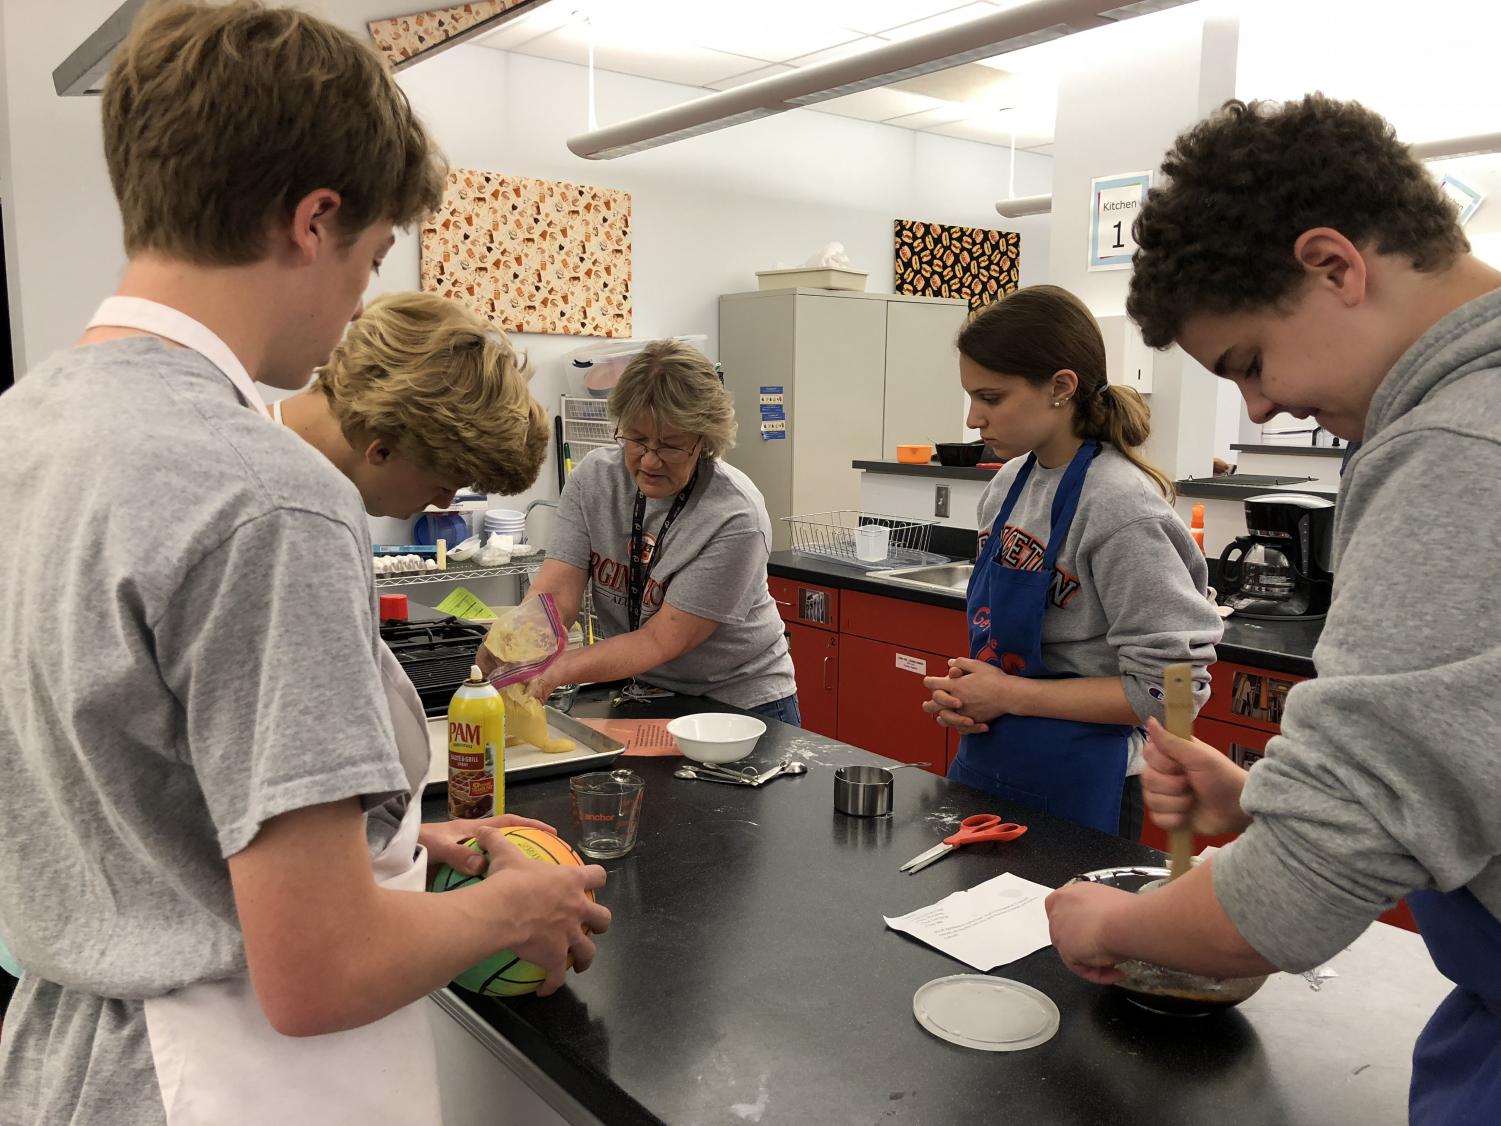  In Food and Fitness, teachers Rosemary Molle and Zahra Castellano teach students the fundamental skills they need to work and be healthy in the kitchen.